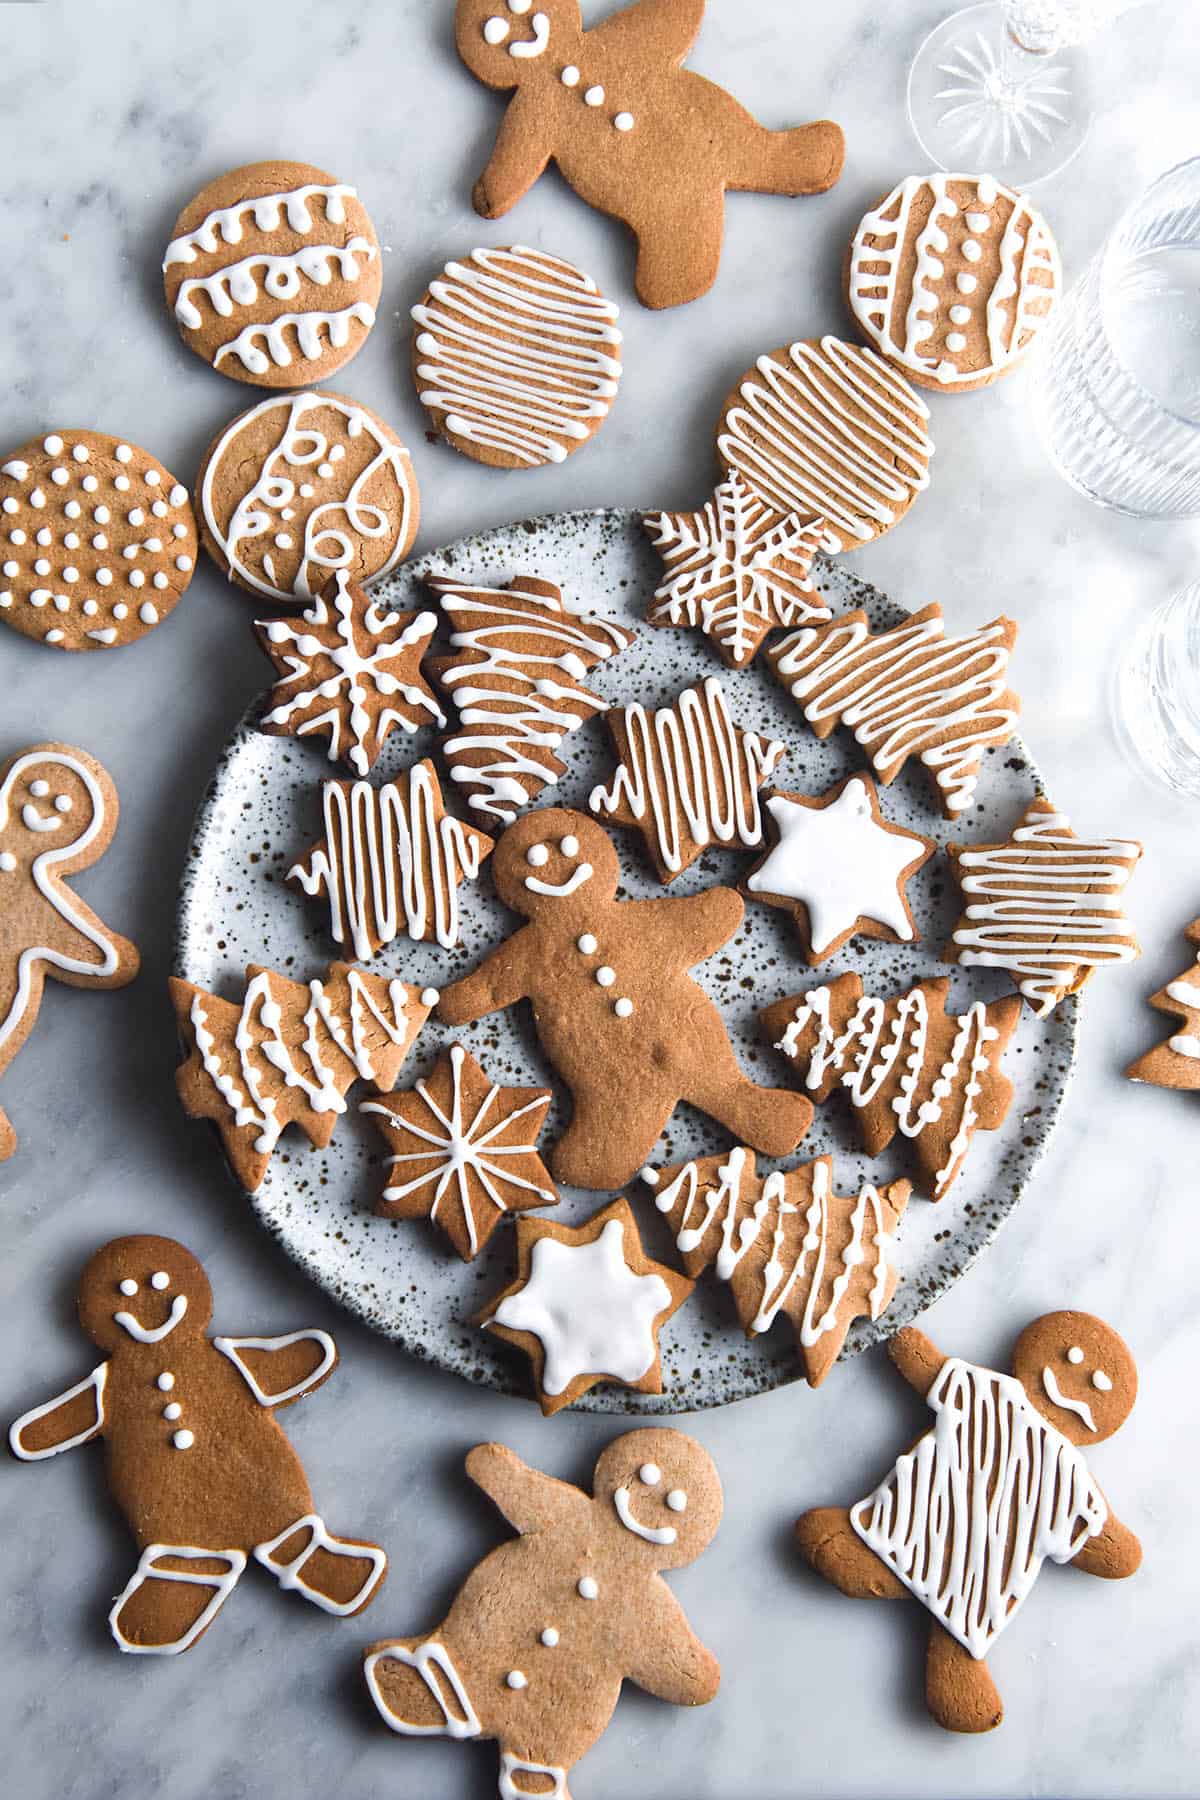 An aerial view of a white marble table casually strewn with gluten free gingerbread cookies in various shapes. The majority of the cookies are in the centre of the image on a white speckled ceramic plate. The cookies are decorated with white icing in various patterns